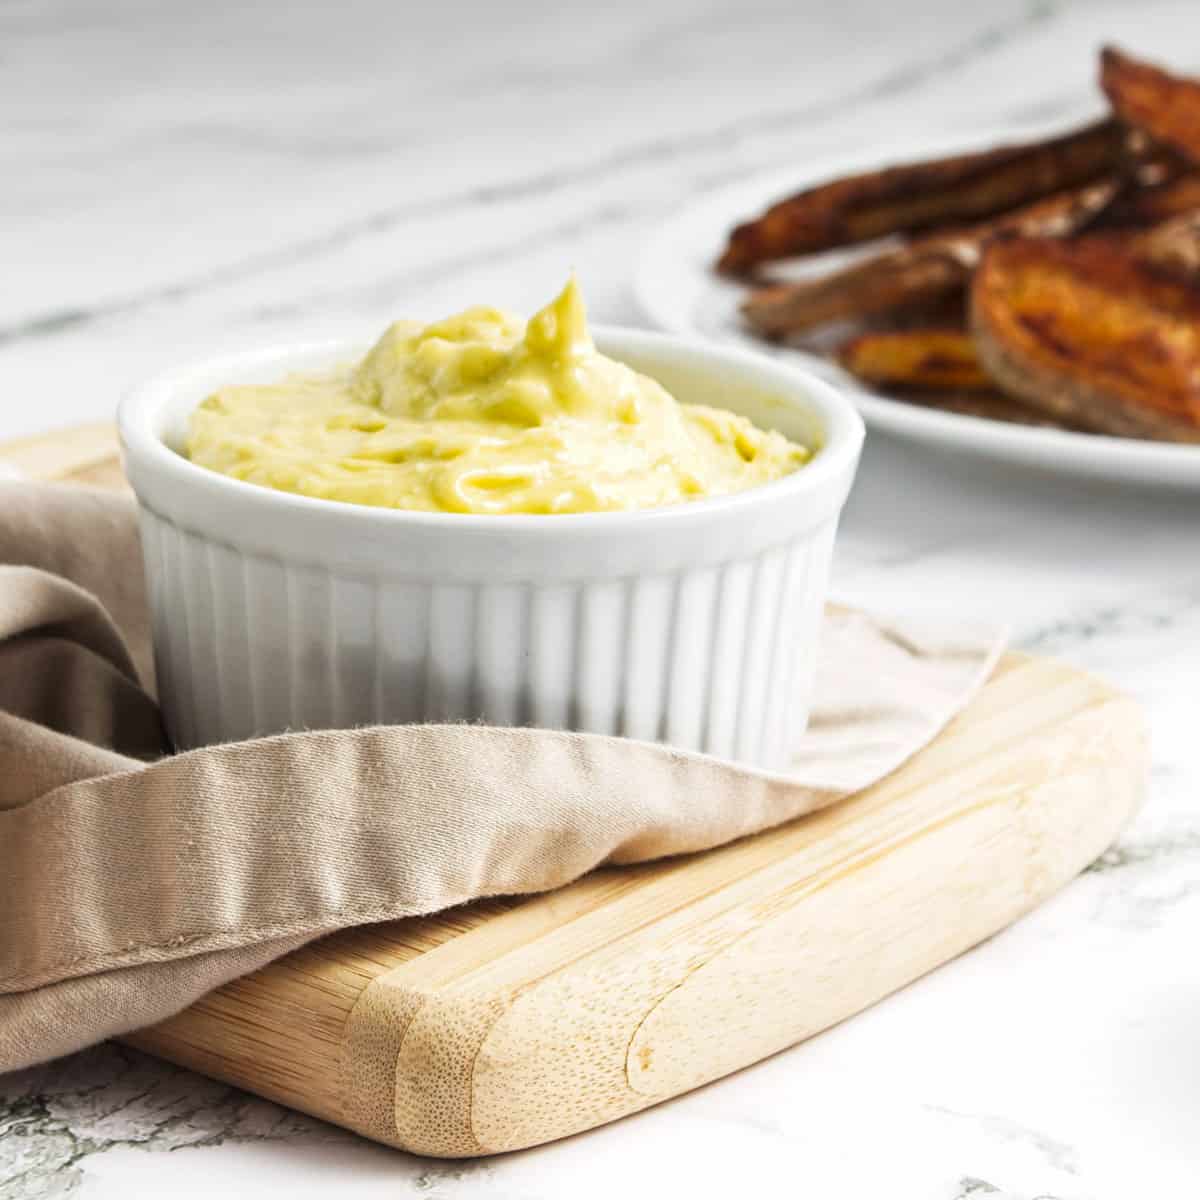 Garlic mayonnaise in small white ramekin on cutting board with plate of toasted bread in background.